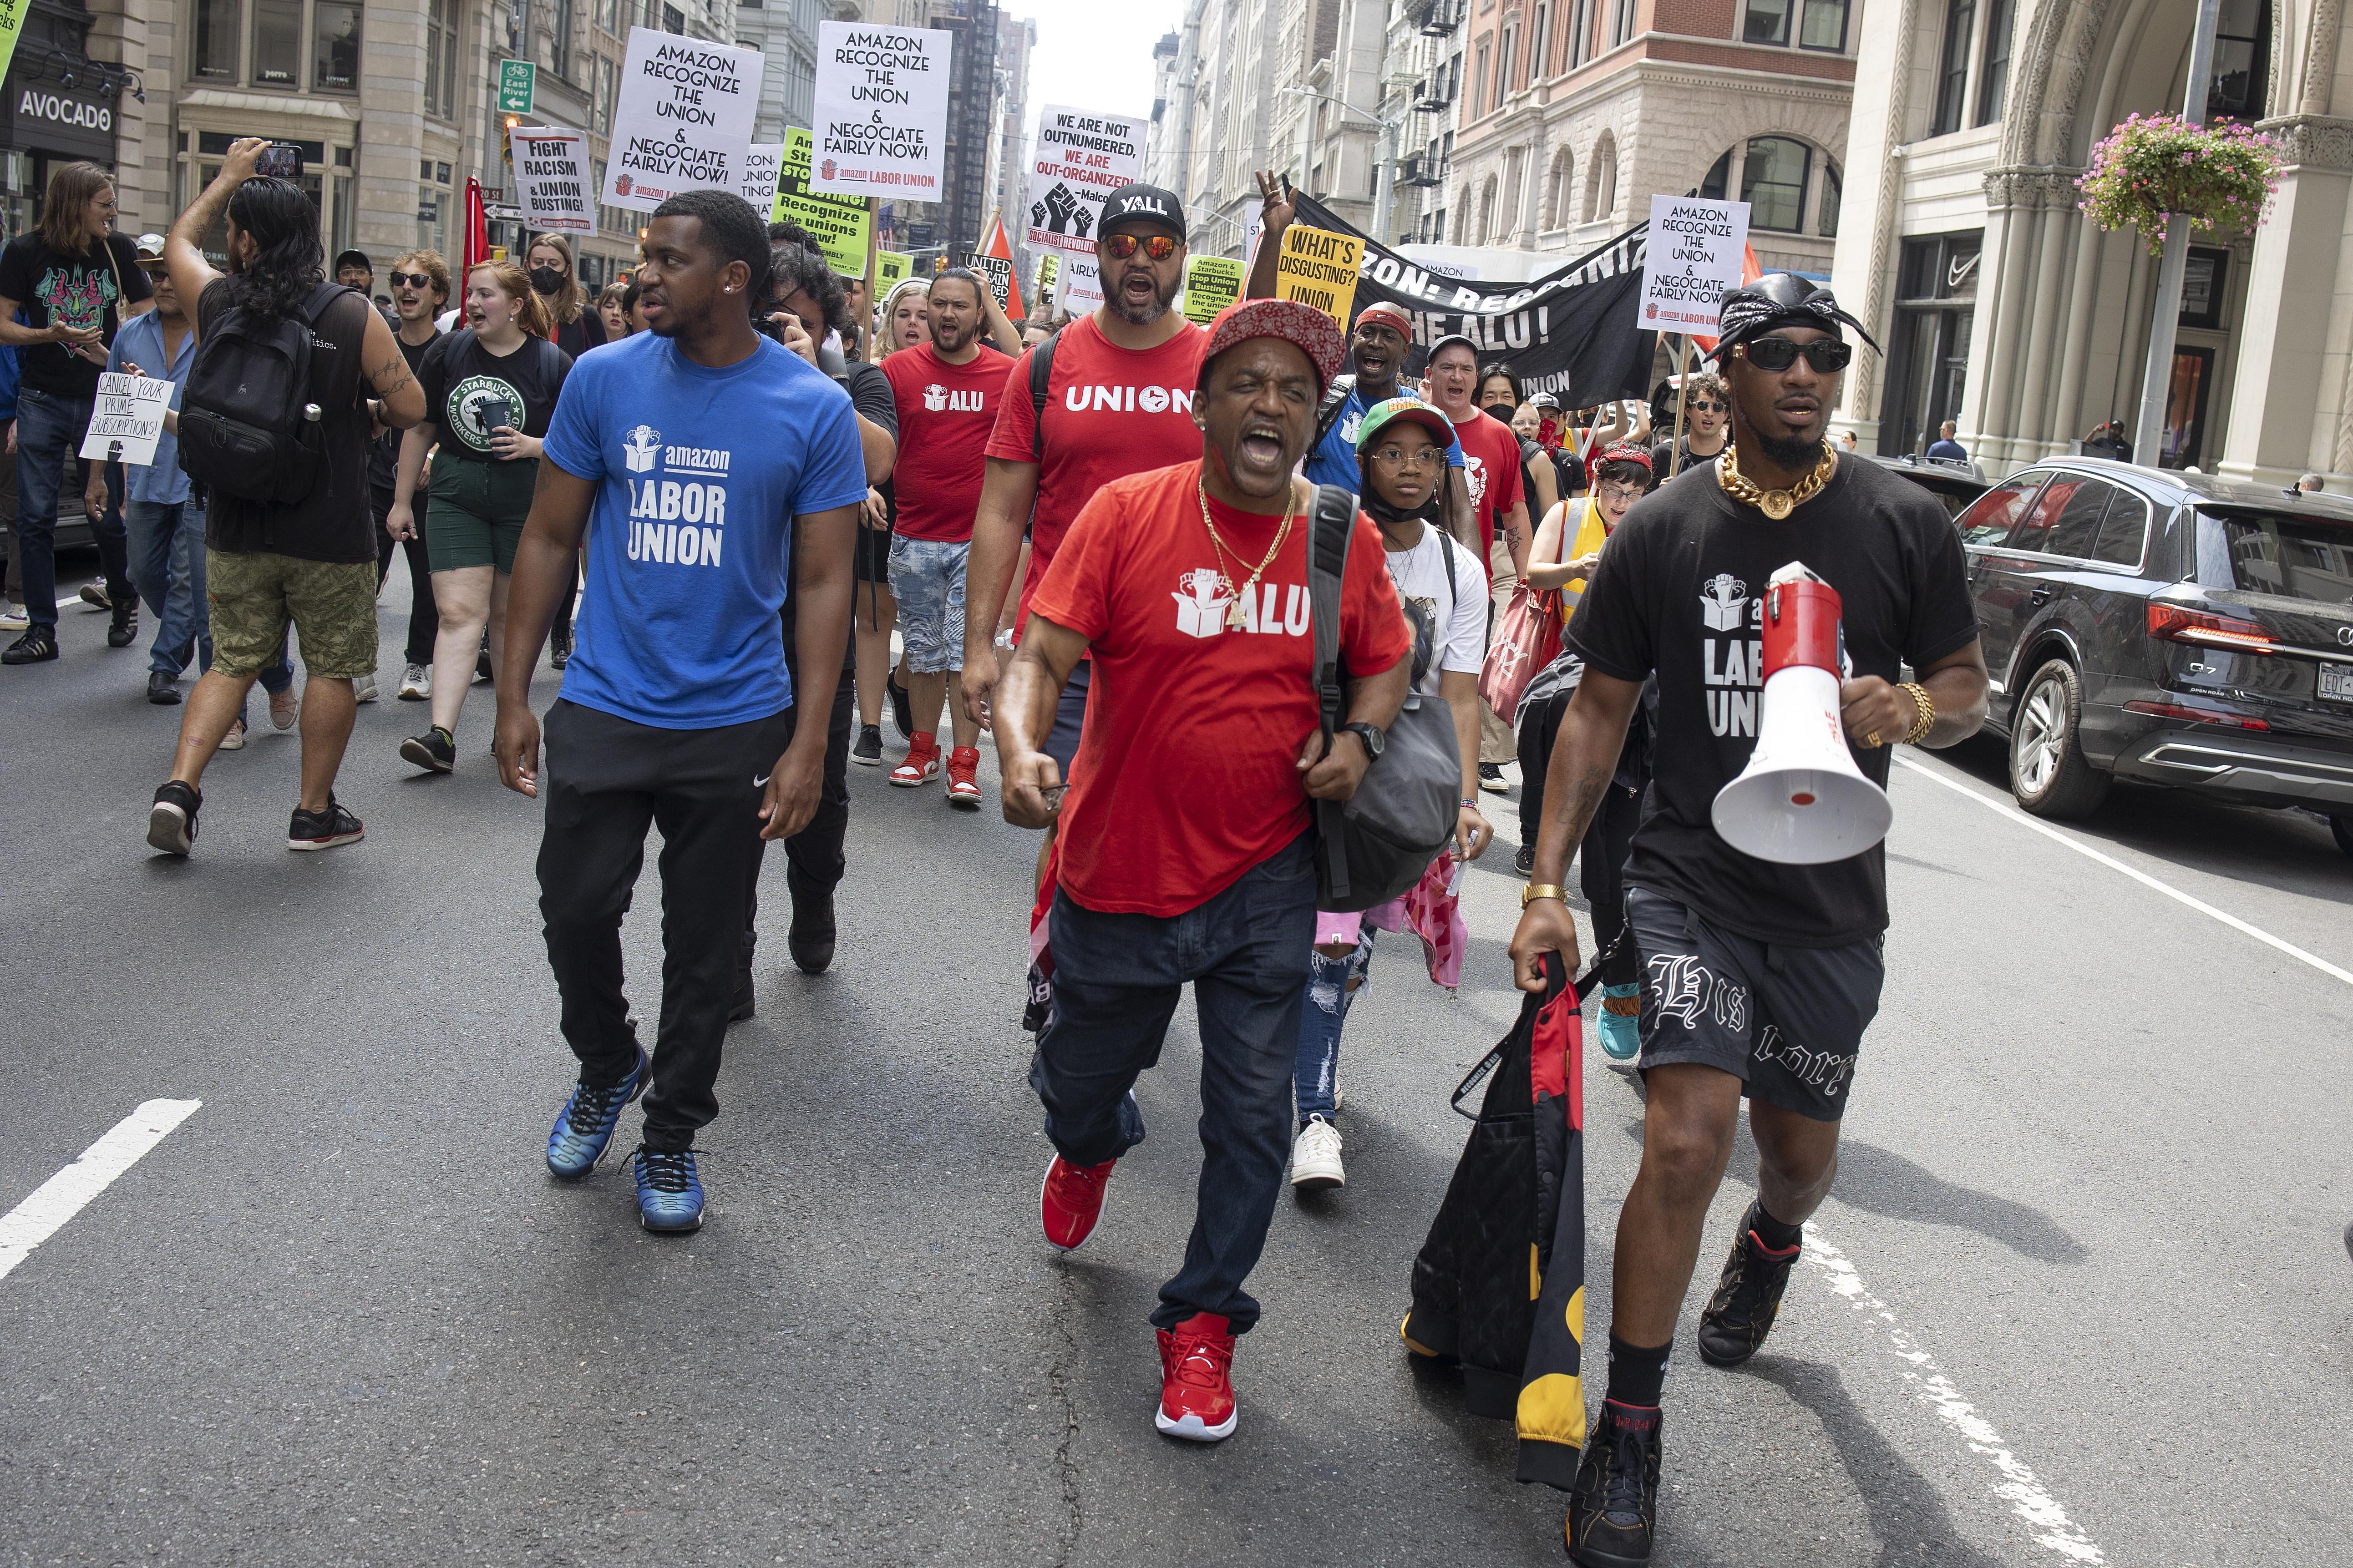 From left to right: Derrick Palmer, Gerald Bryson, and Chris Smalls of the Amazon Labor Union lead a Labor Day march on September 5, 2022 in New York City.